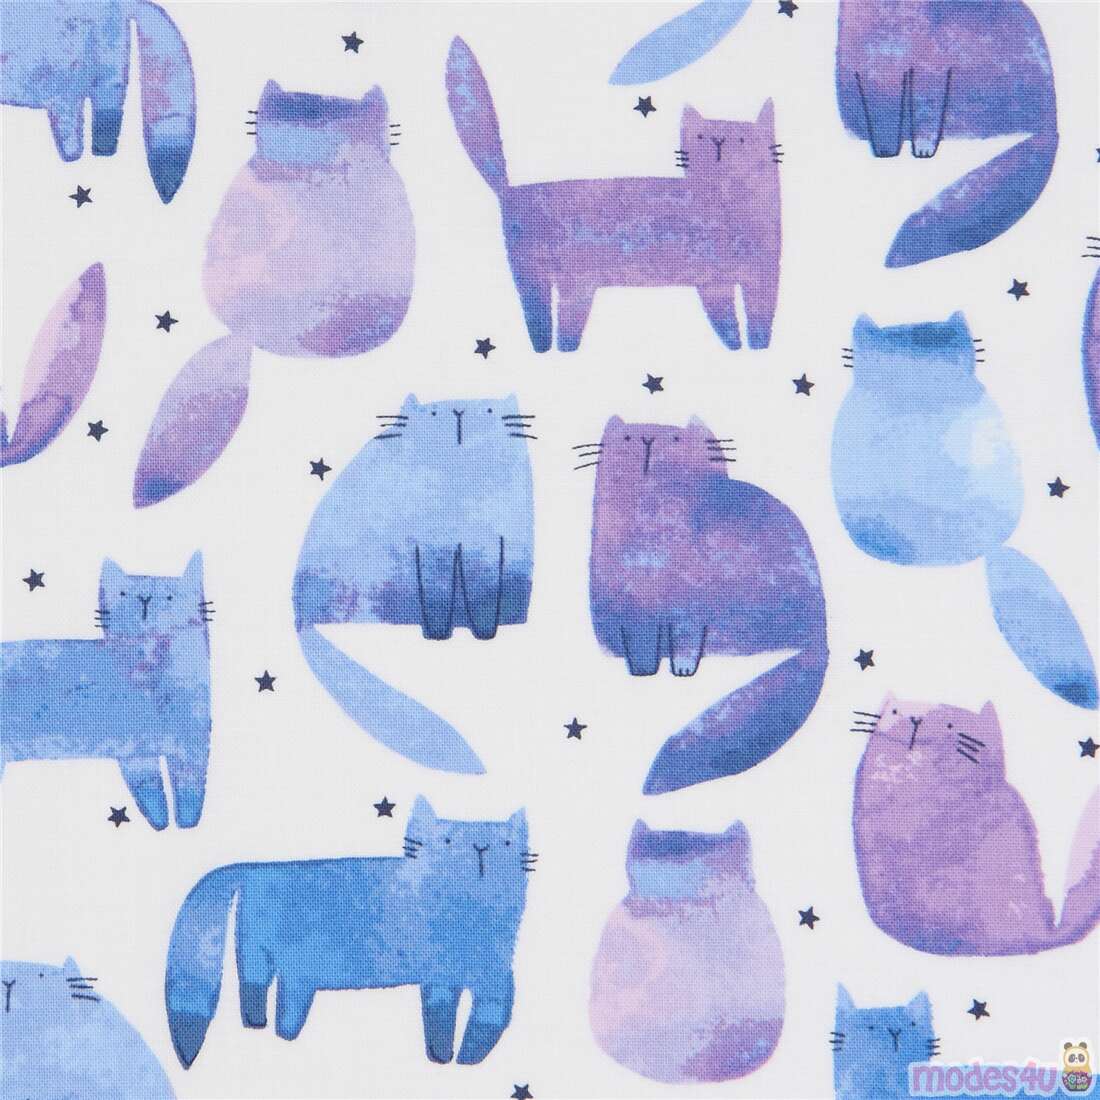 white Dear Stella fabric with purple and blue cats - modeS4u